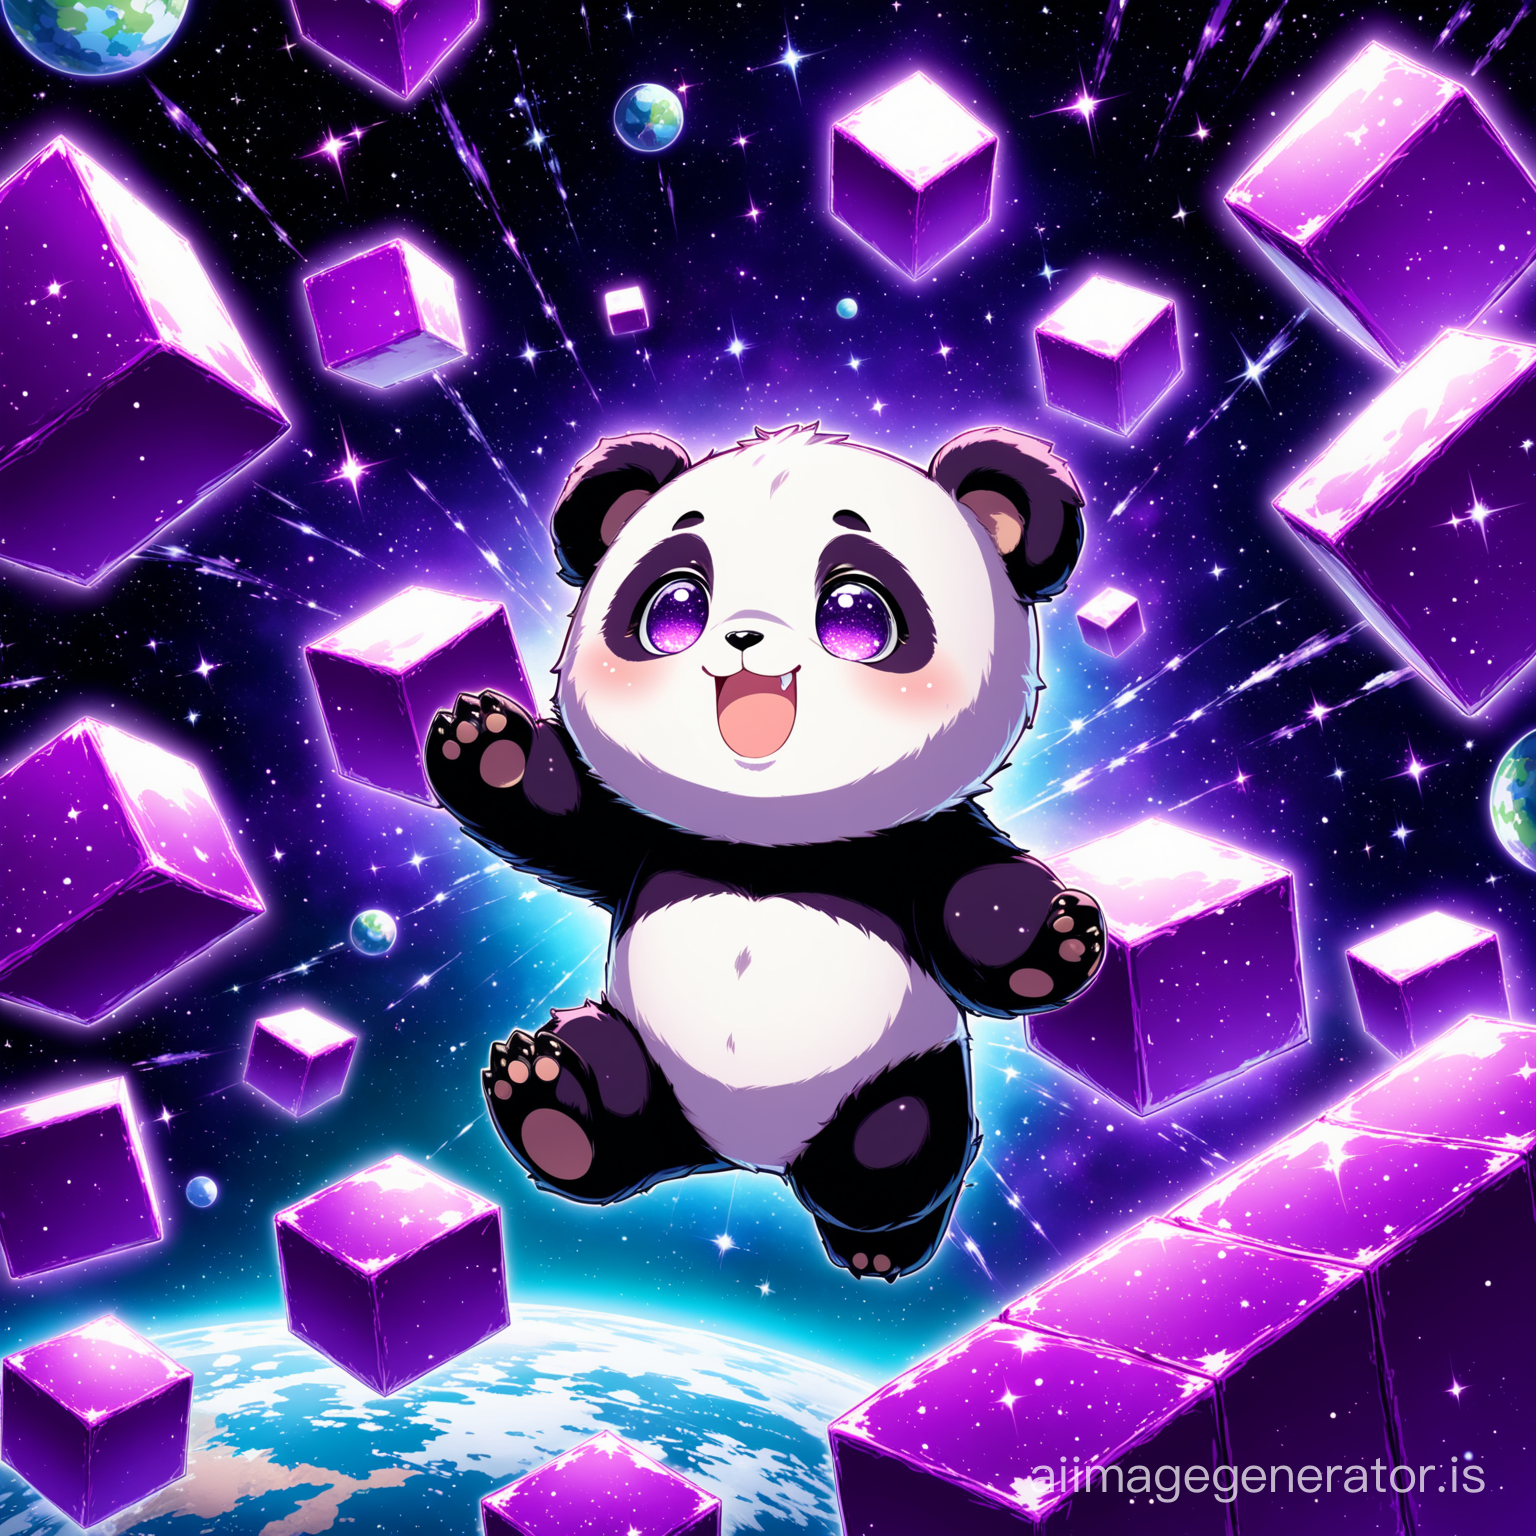 A little happy cute purple panda blocks with purple eye and smile in space with super detail and High Quality
big and purple blocks and floating are seen everywhere
Details are evident beautifully and with great precision